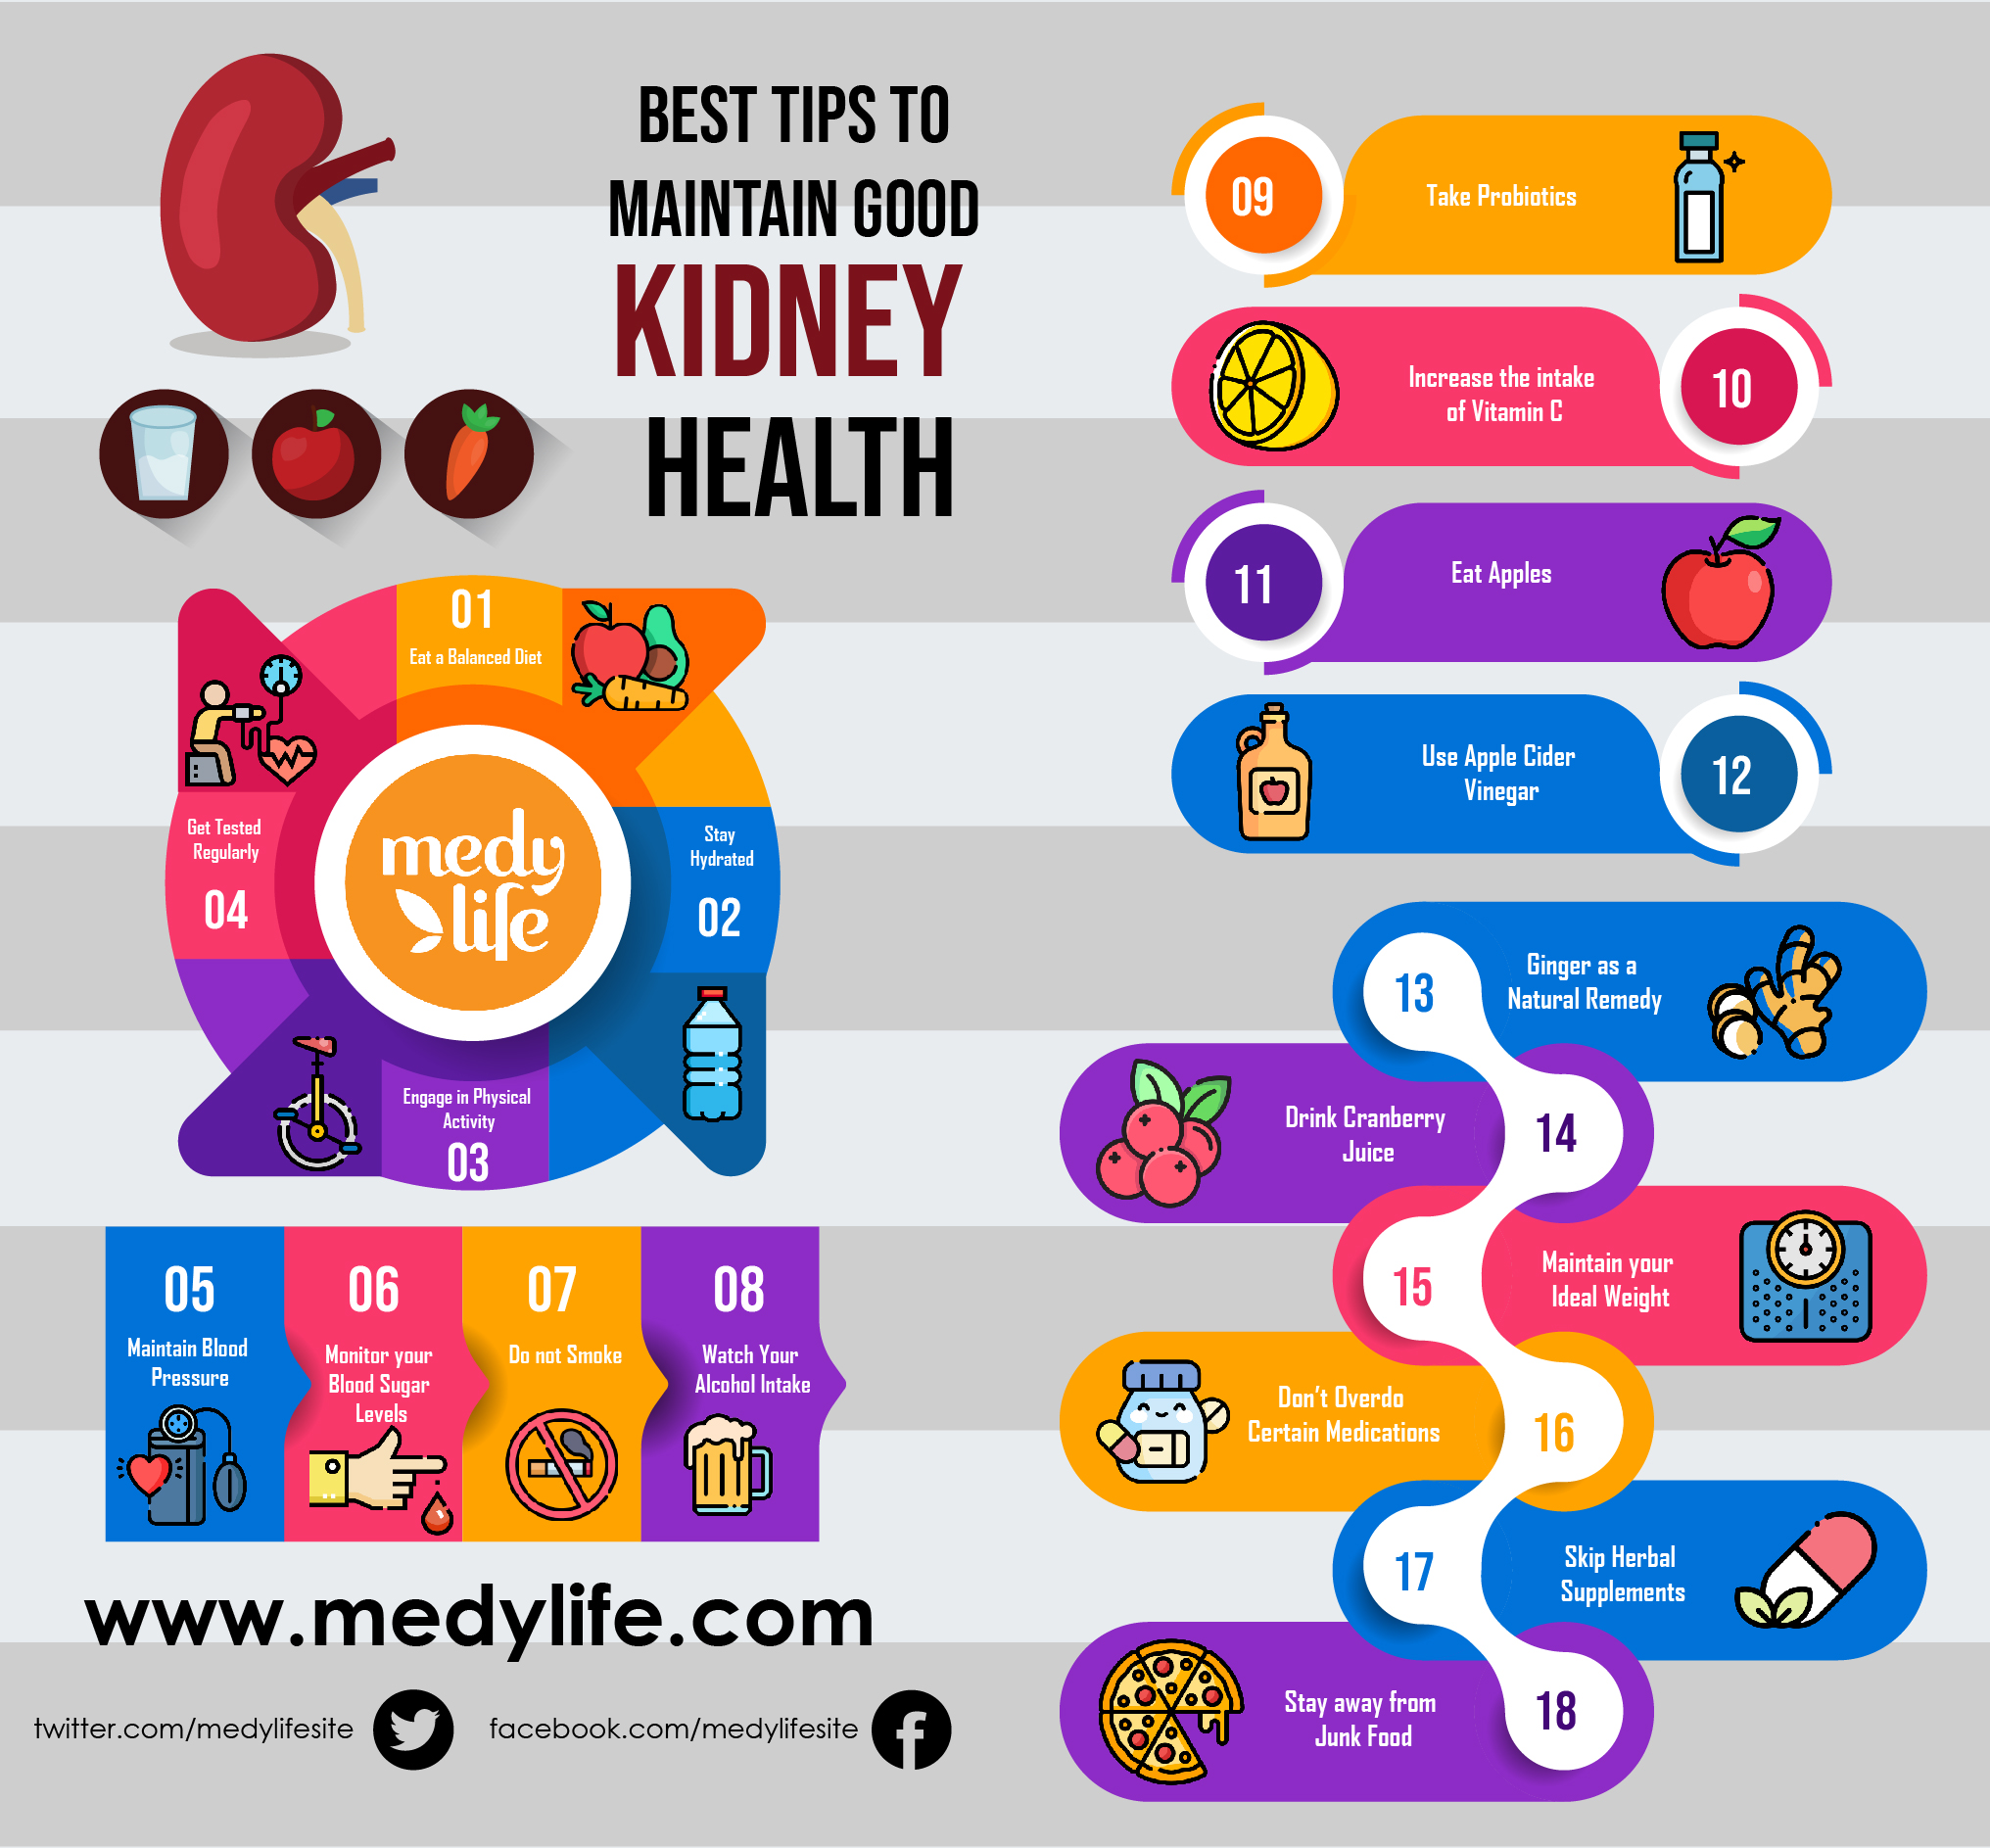 Best Tips to Maintain Good Kidney Health